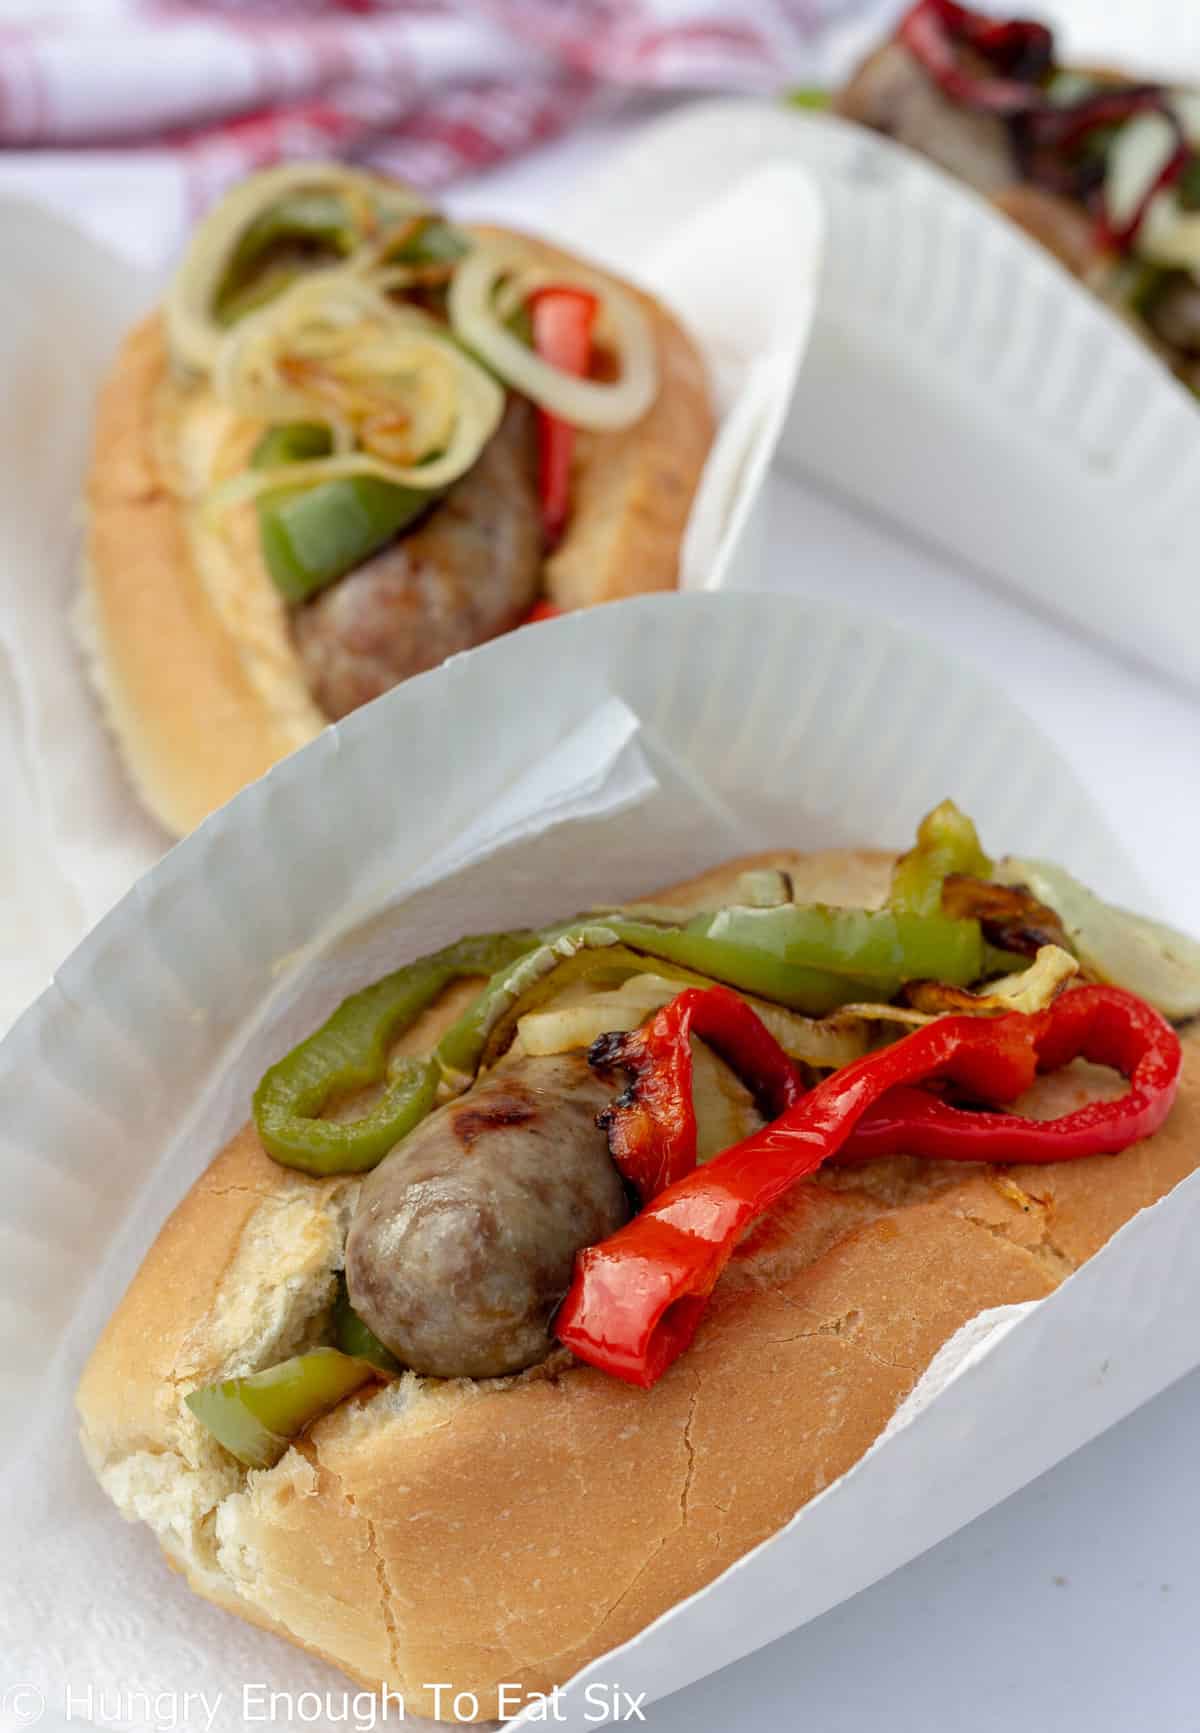 Sausage with peppers and onions on a roll.